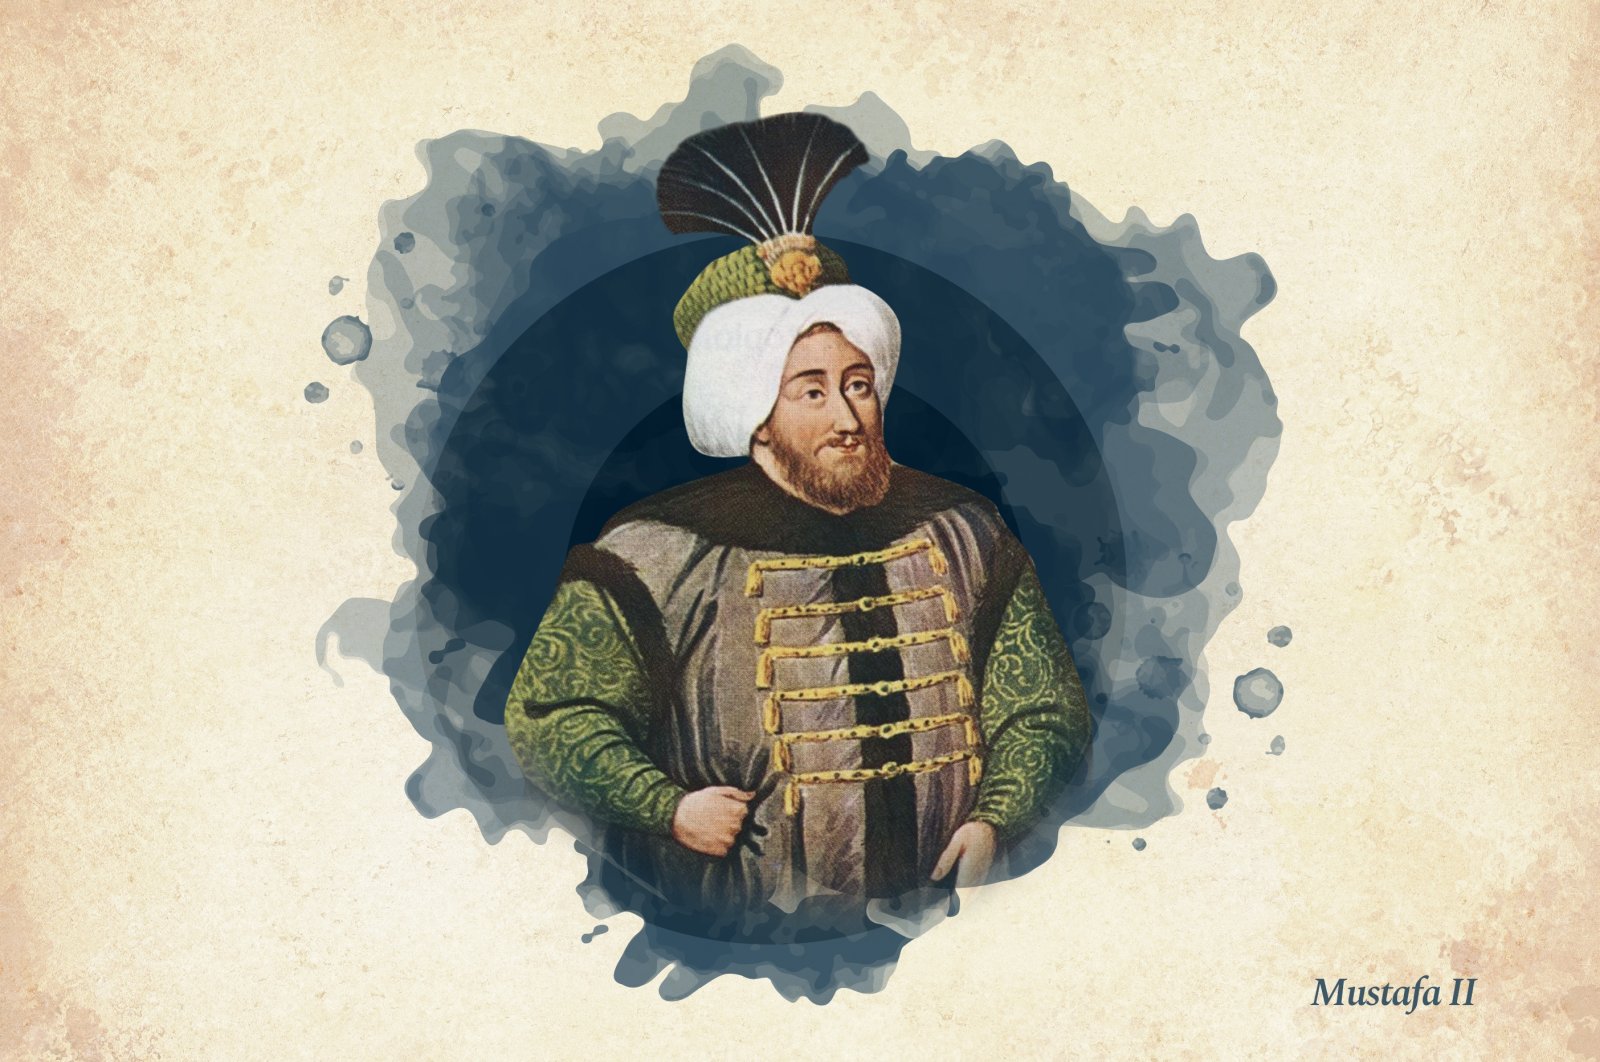 This widely used illustration shows Sultan Mustafa II, the 22nd ruler of the Ottoman Empire. (Wikimedia/ Edited by Büşra Öztürk)